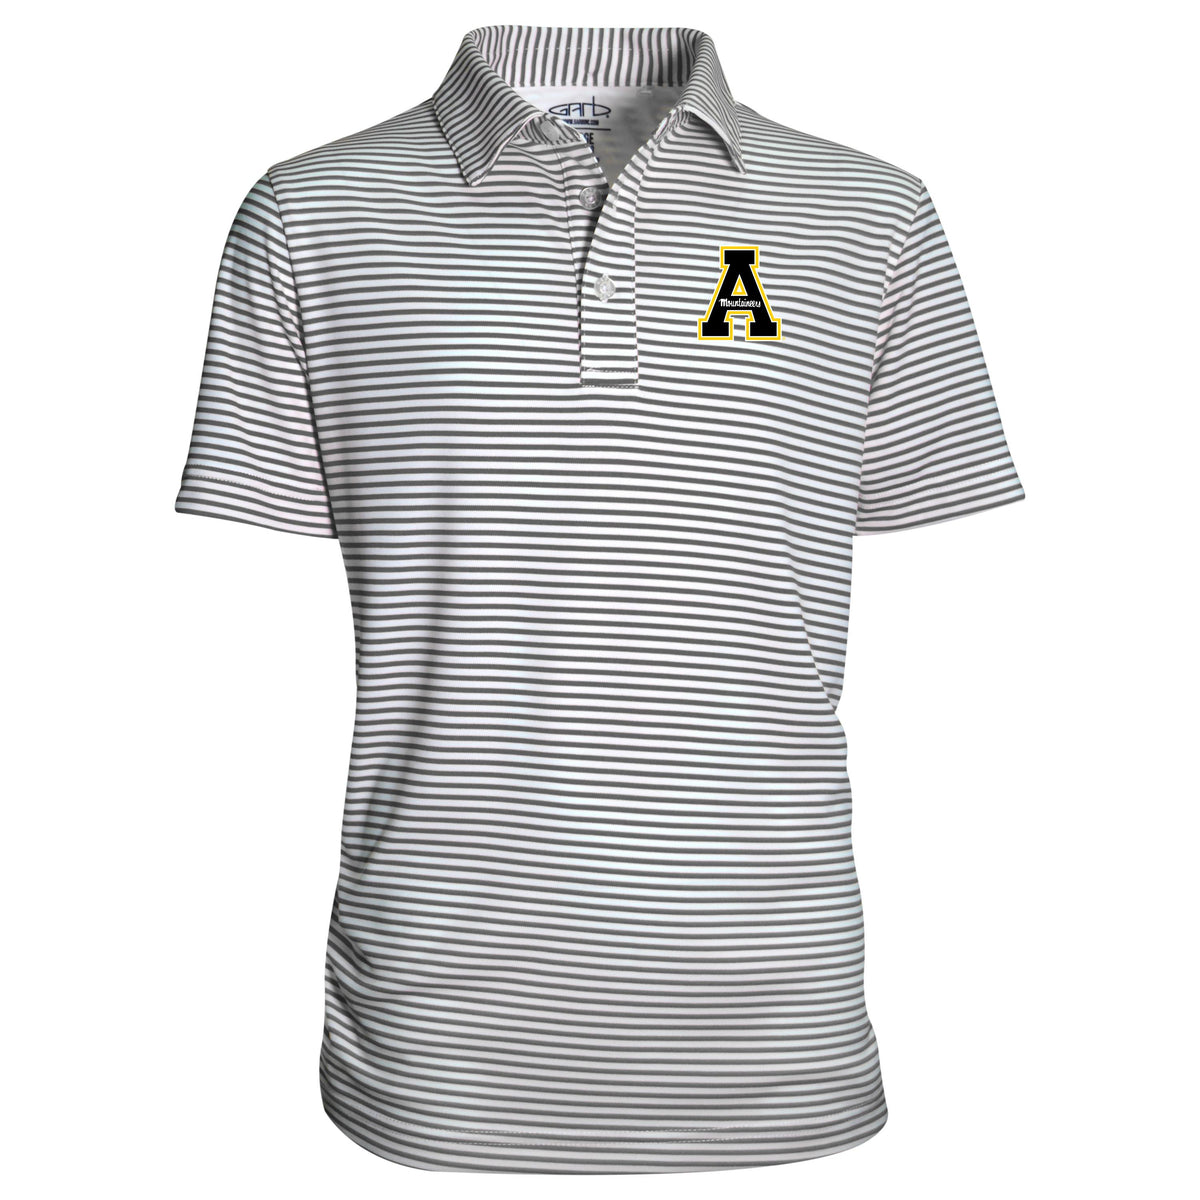 Appalachian State Mountaineers Youth Boys' Polo